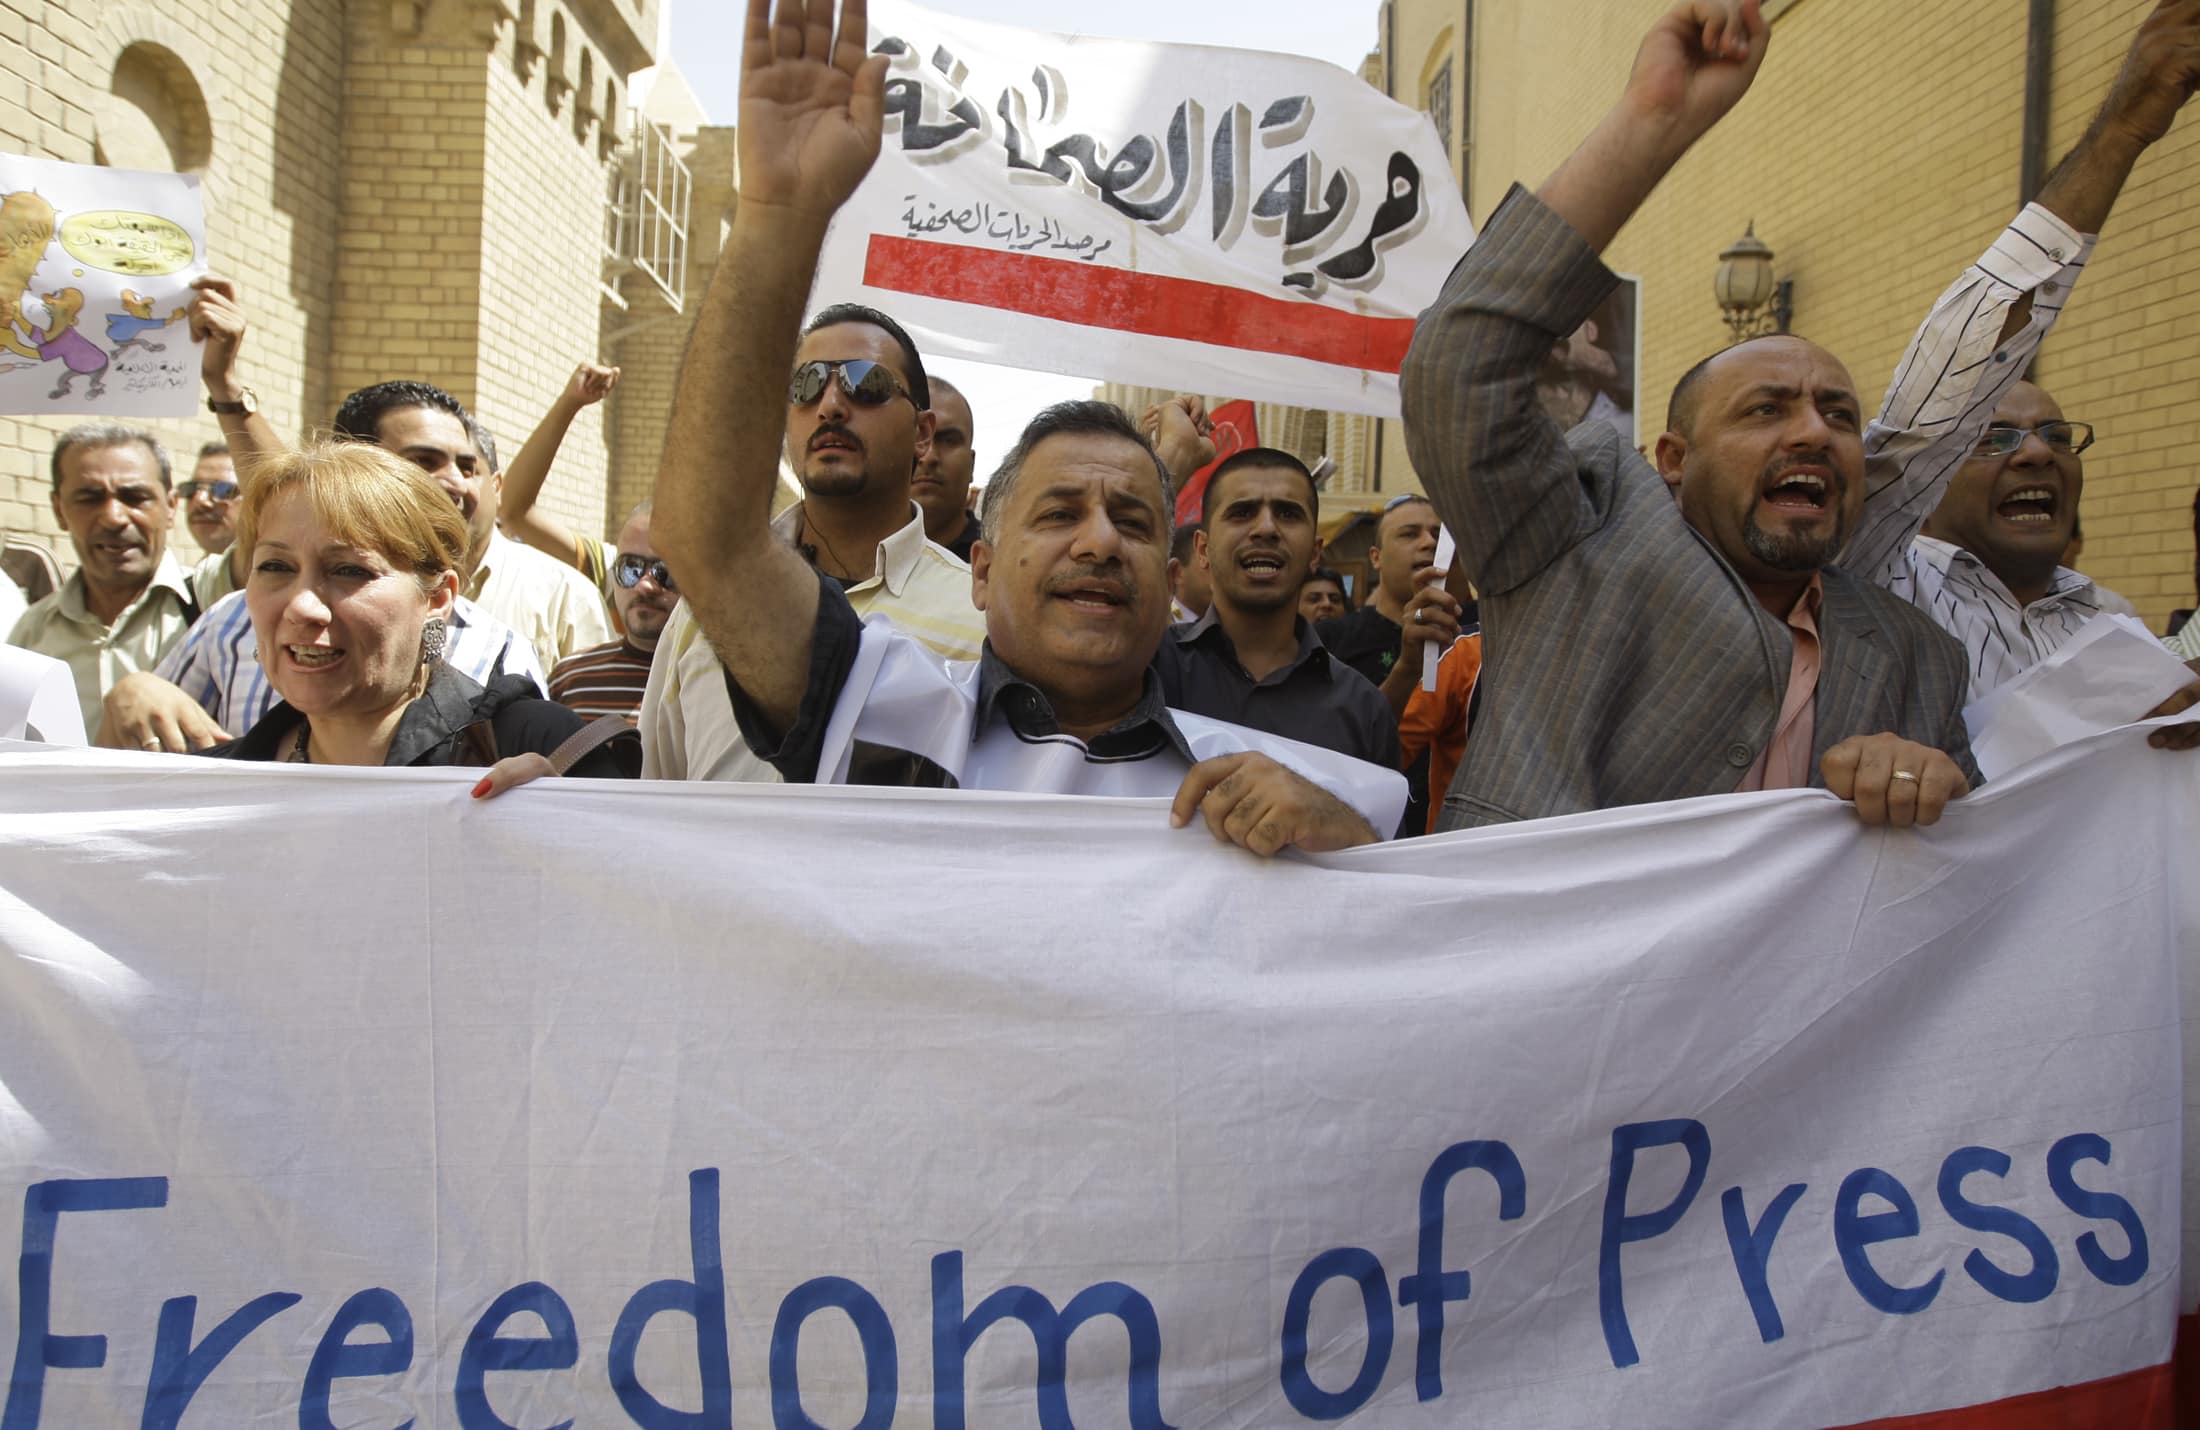 Iraq has the world's worst record on impunity, according to CPJ's Impunity index; in this photo, Iraqi protesters chant slogans in support of press freedom in 2009, REUTERS/Mohammed Ameen